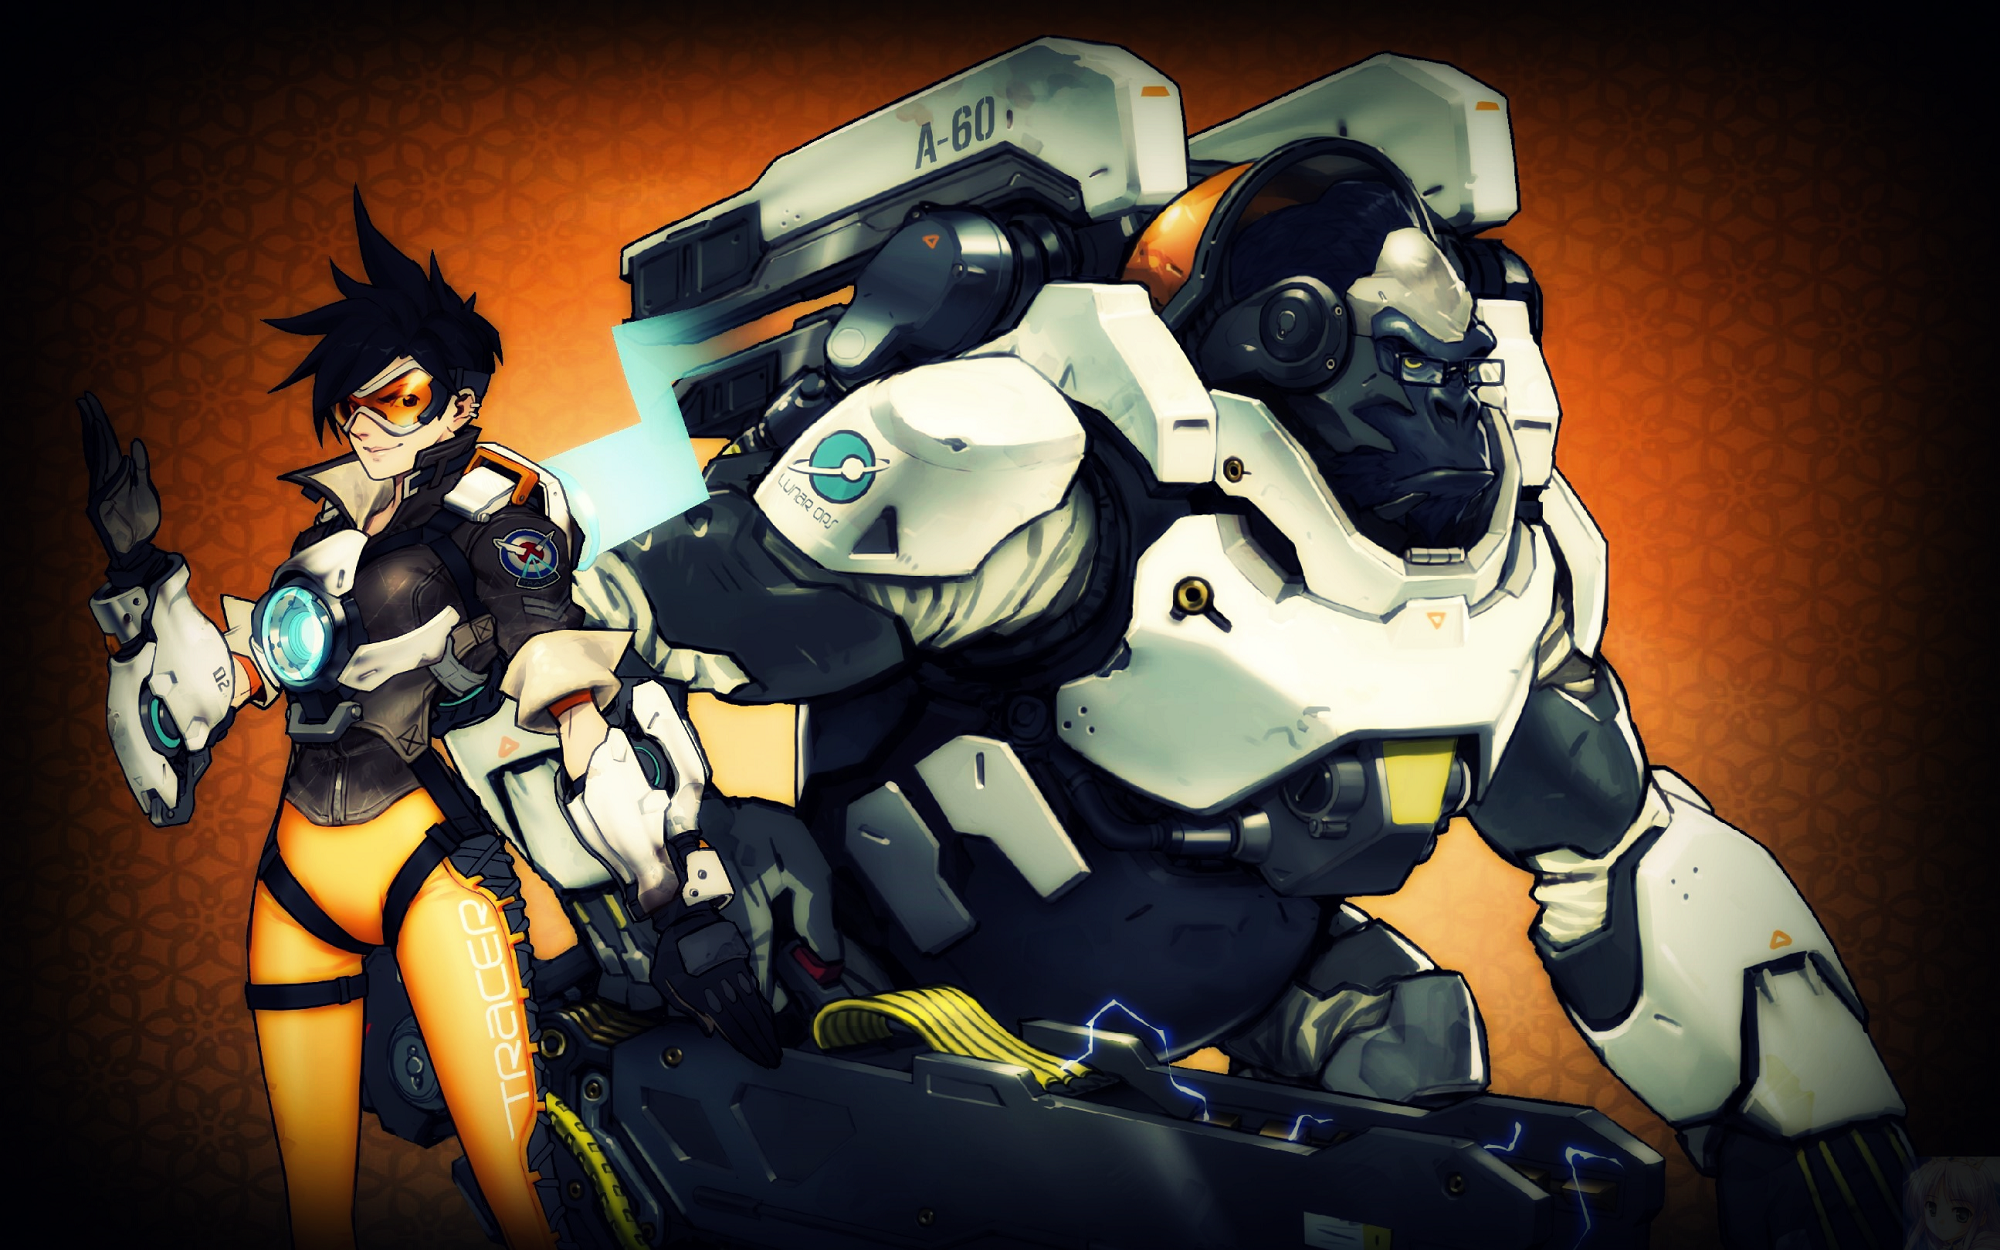 Image For Winston & Tracer - Winston Overwatch Concept Art , HD Wallpaper & Backgrounds